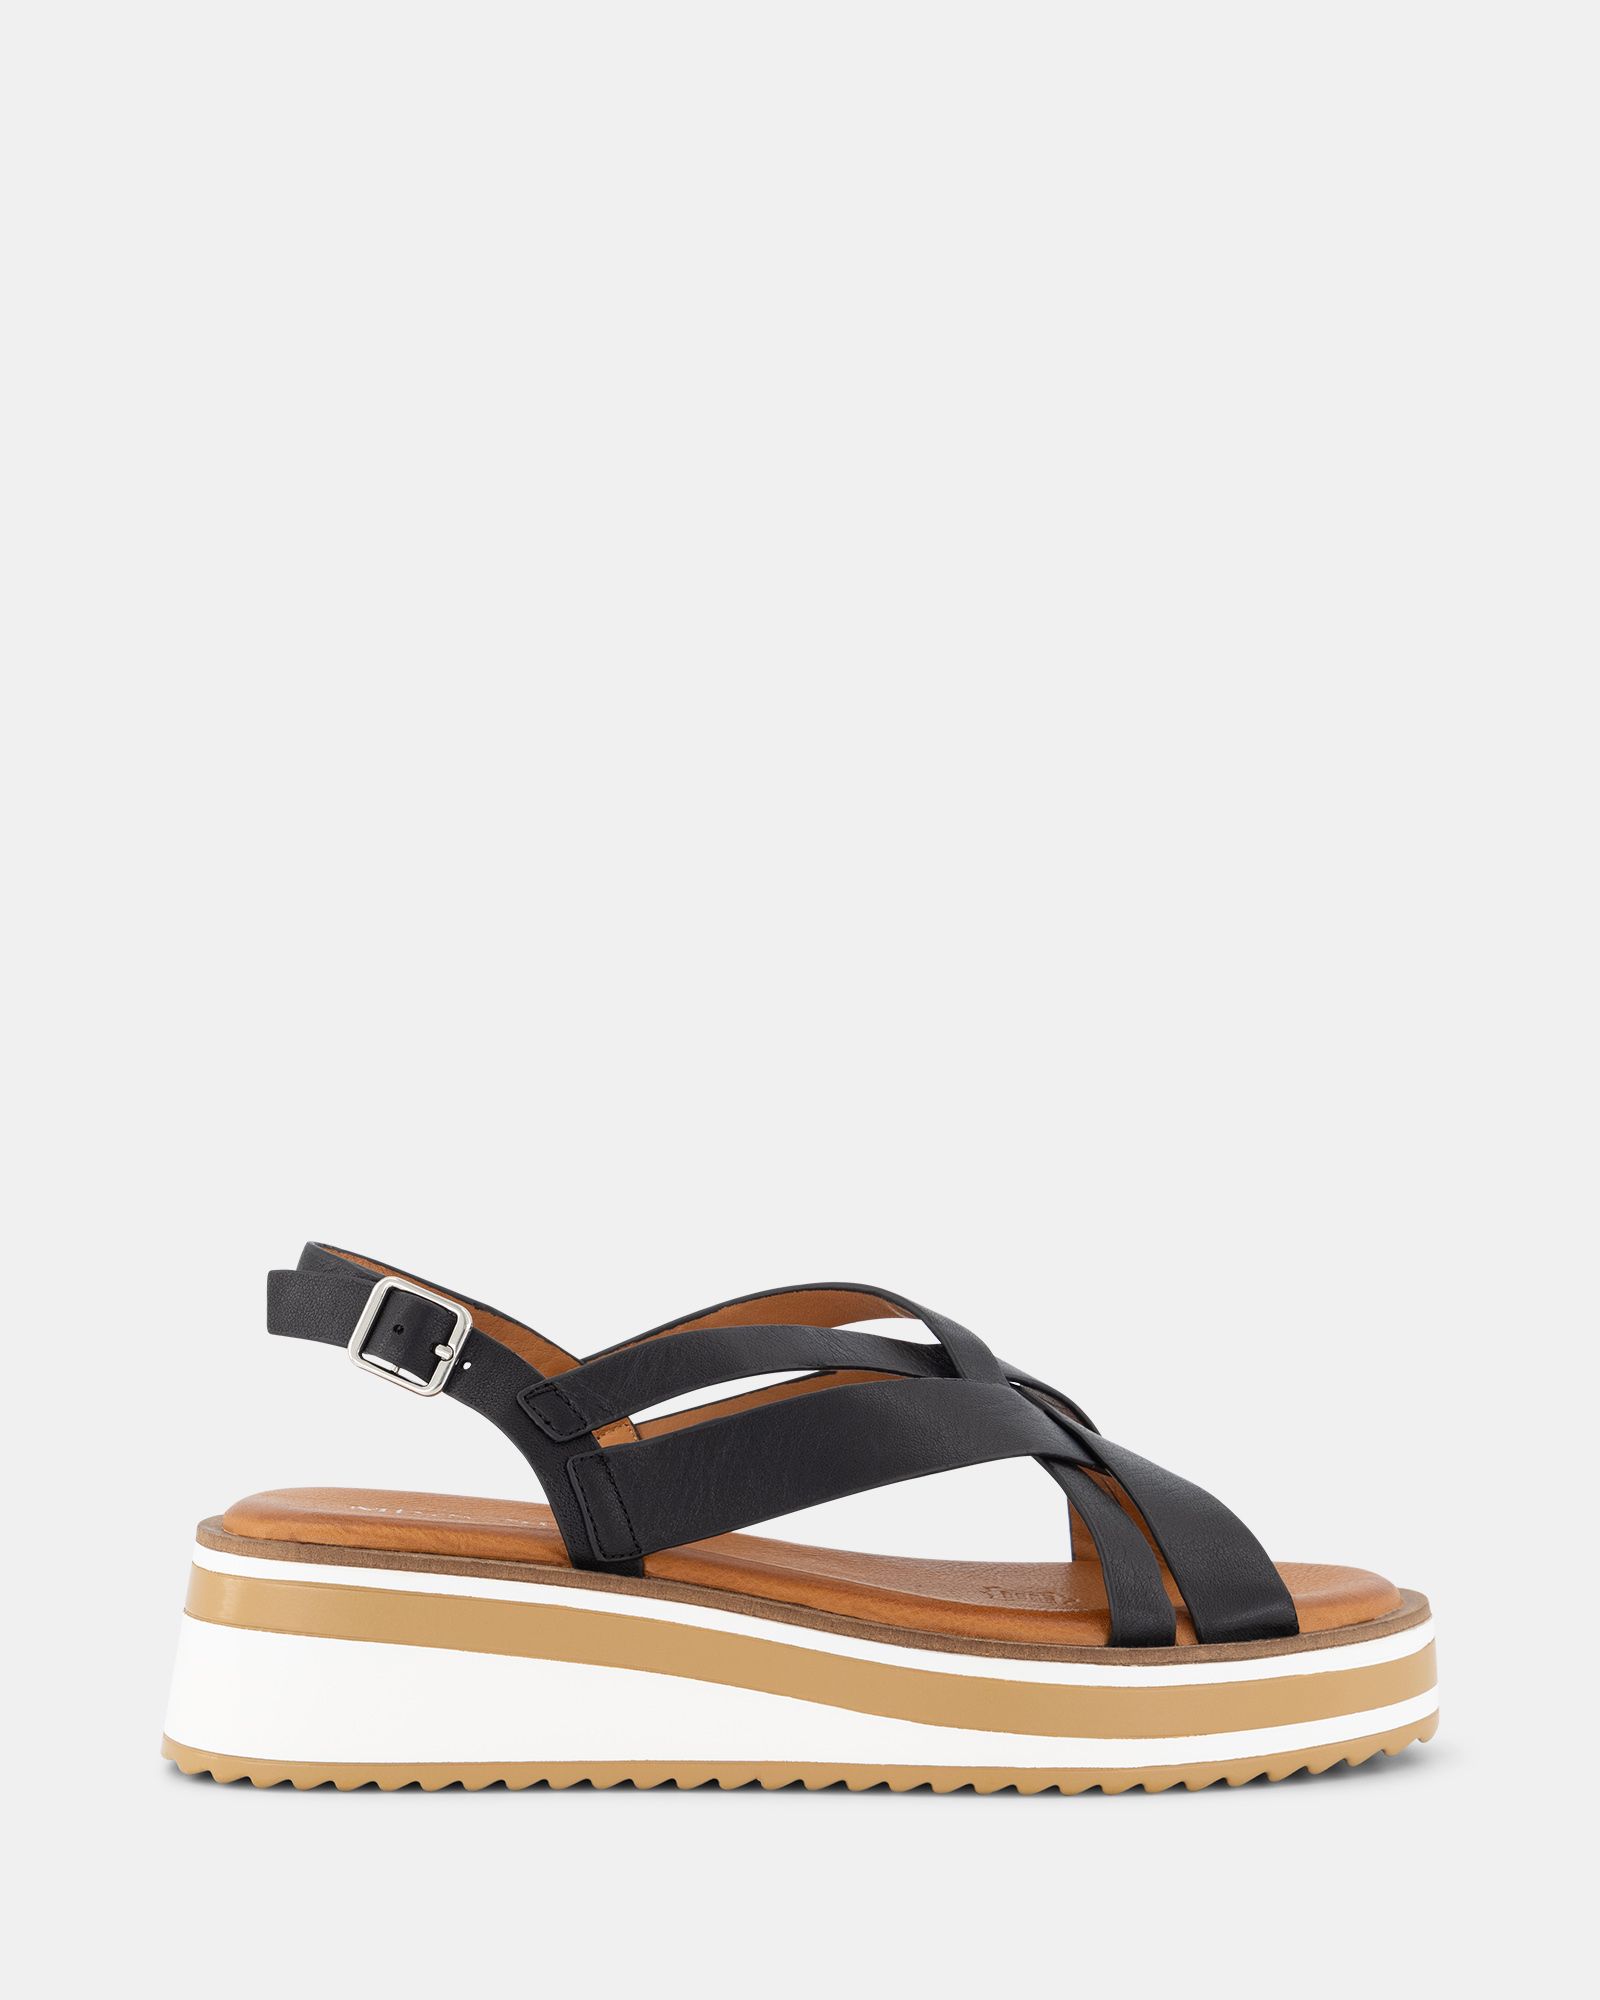 Buy MOLLY Black sandals Online at Shoe Connection